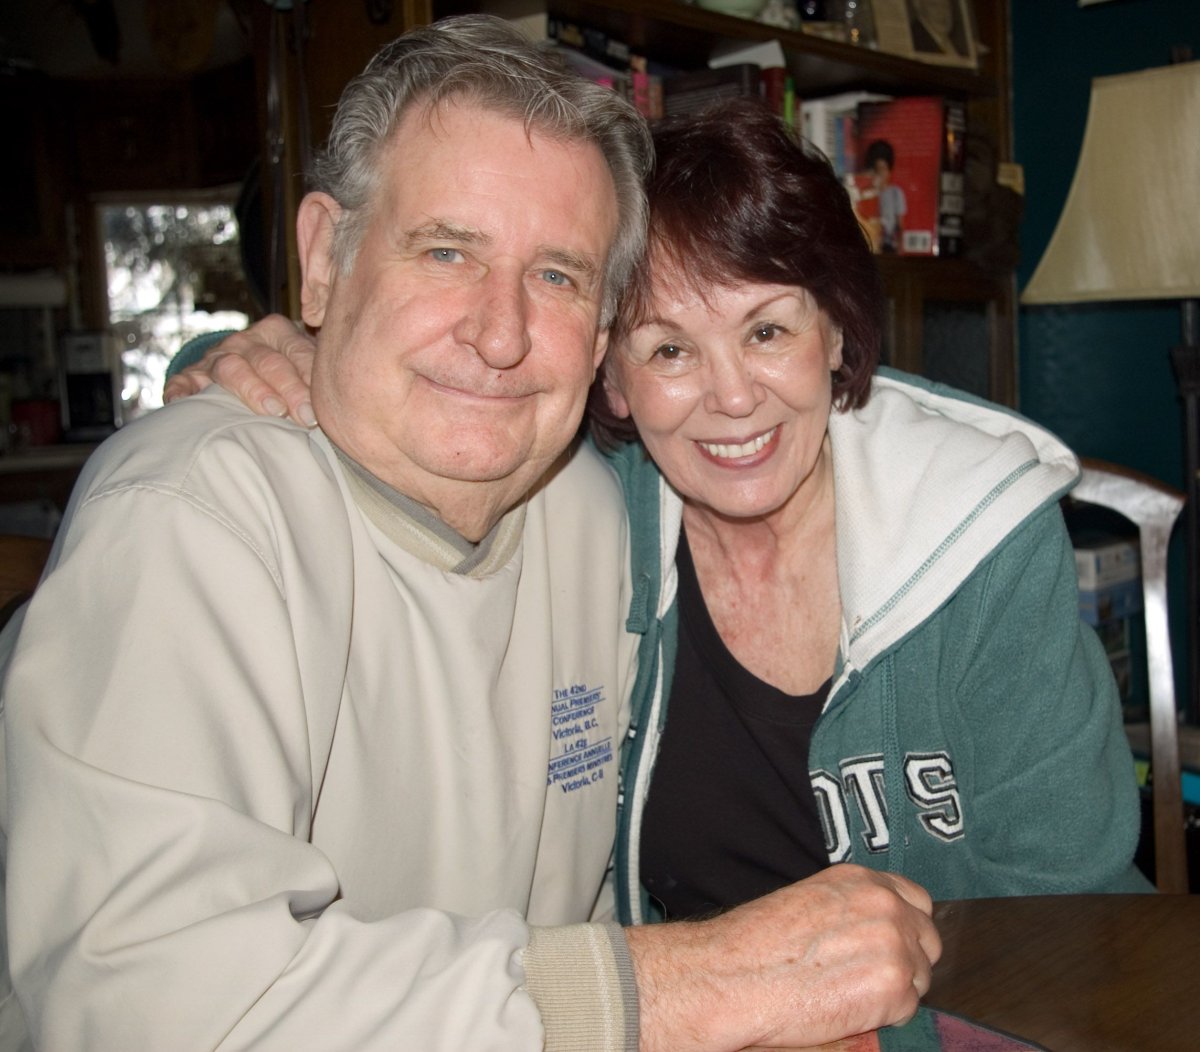 Former Alberta Premier Ralph Klein and his wife Colleen relax at their Calgary home, April 7, 2011.